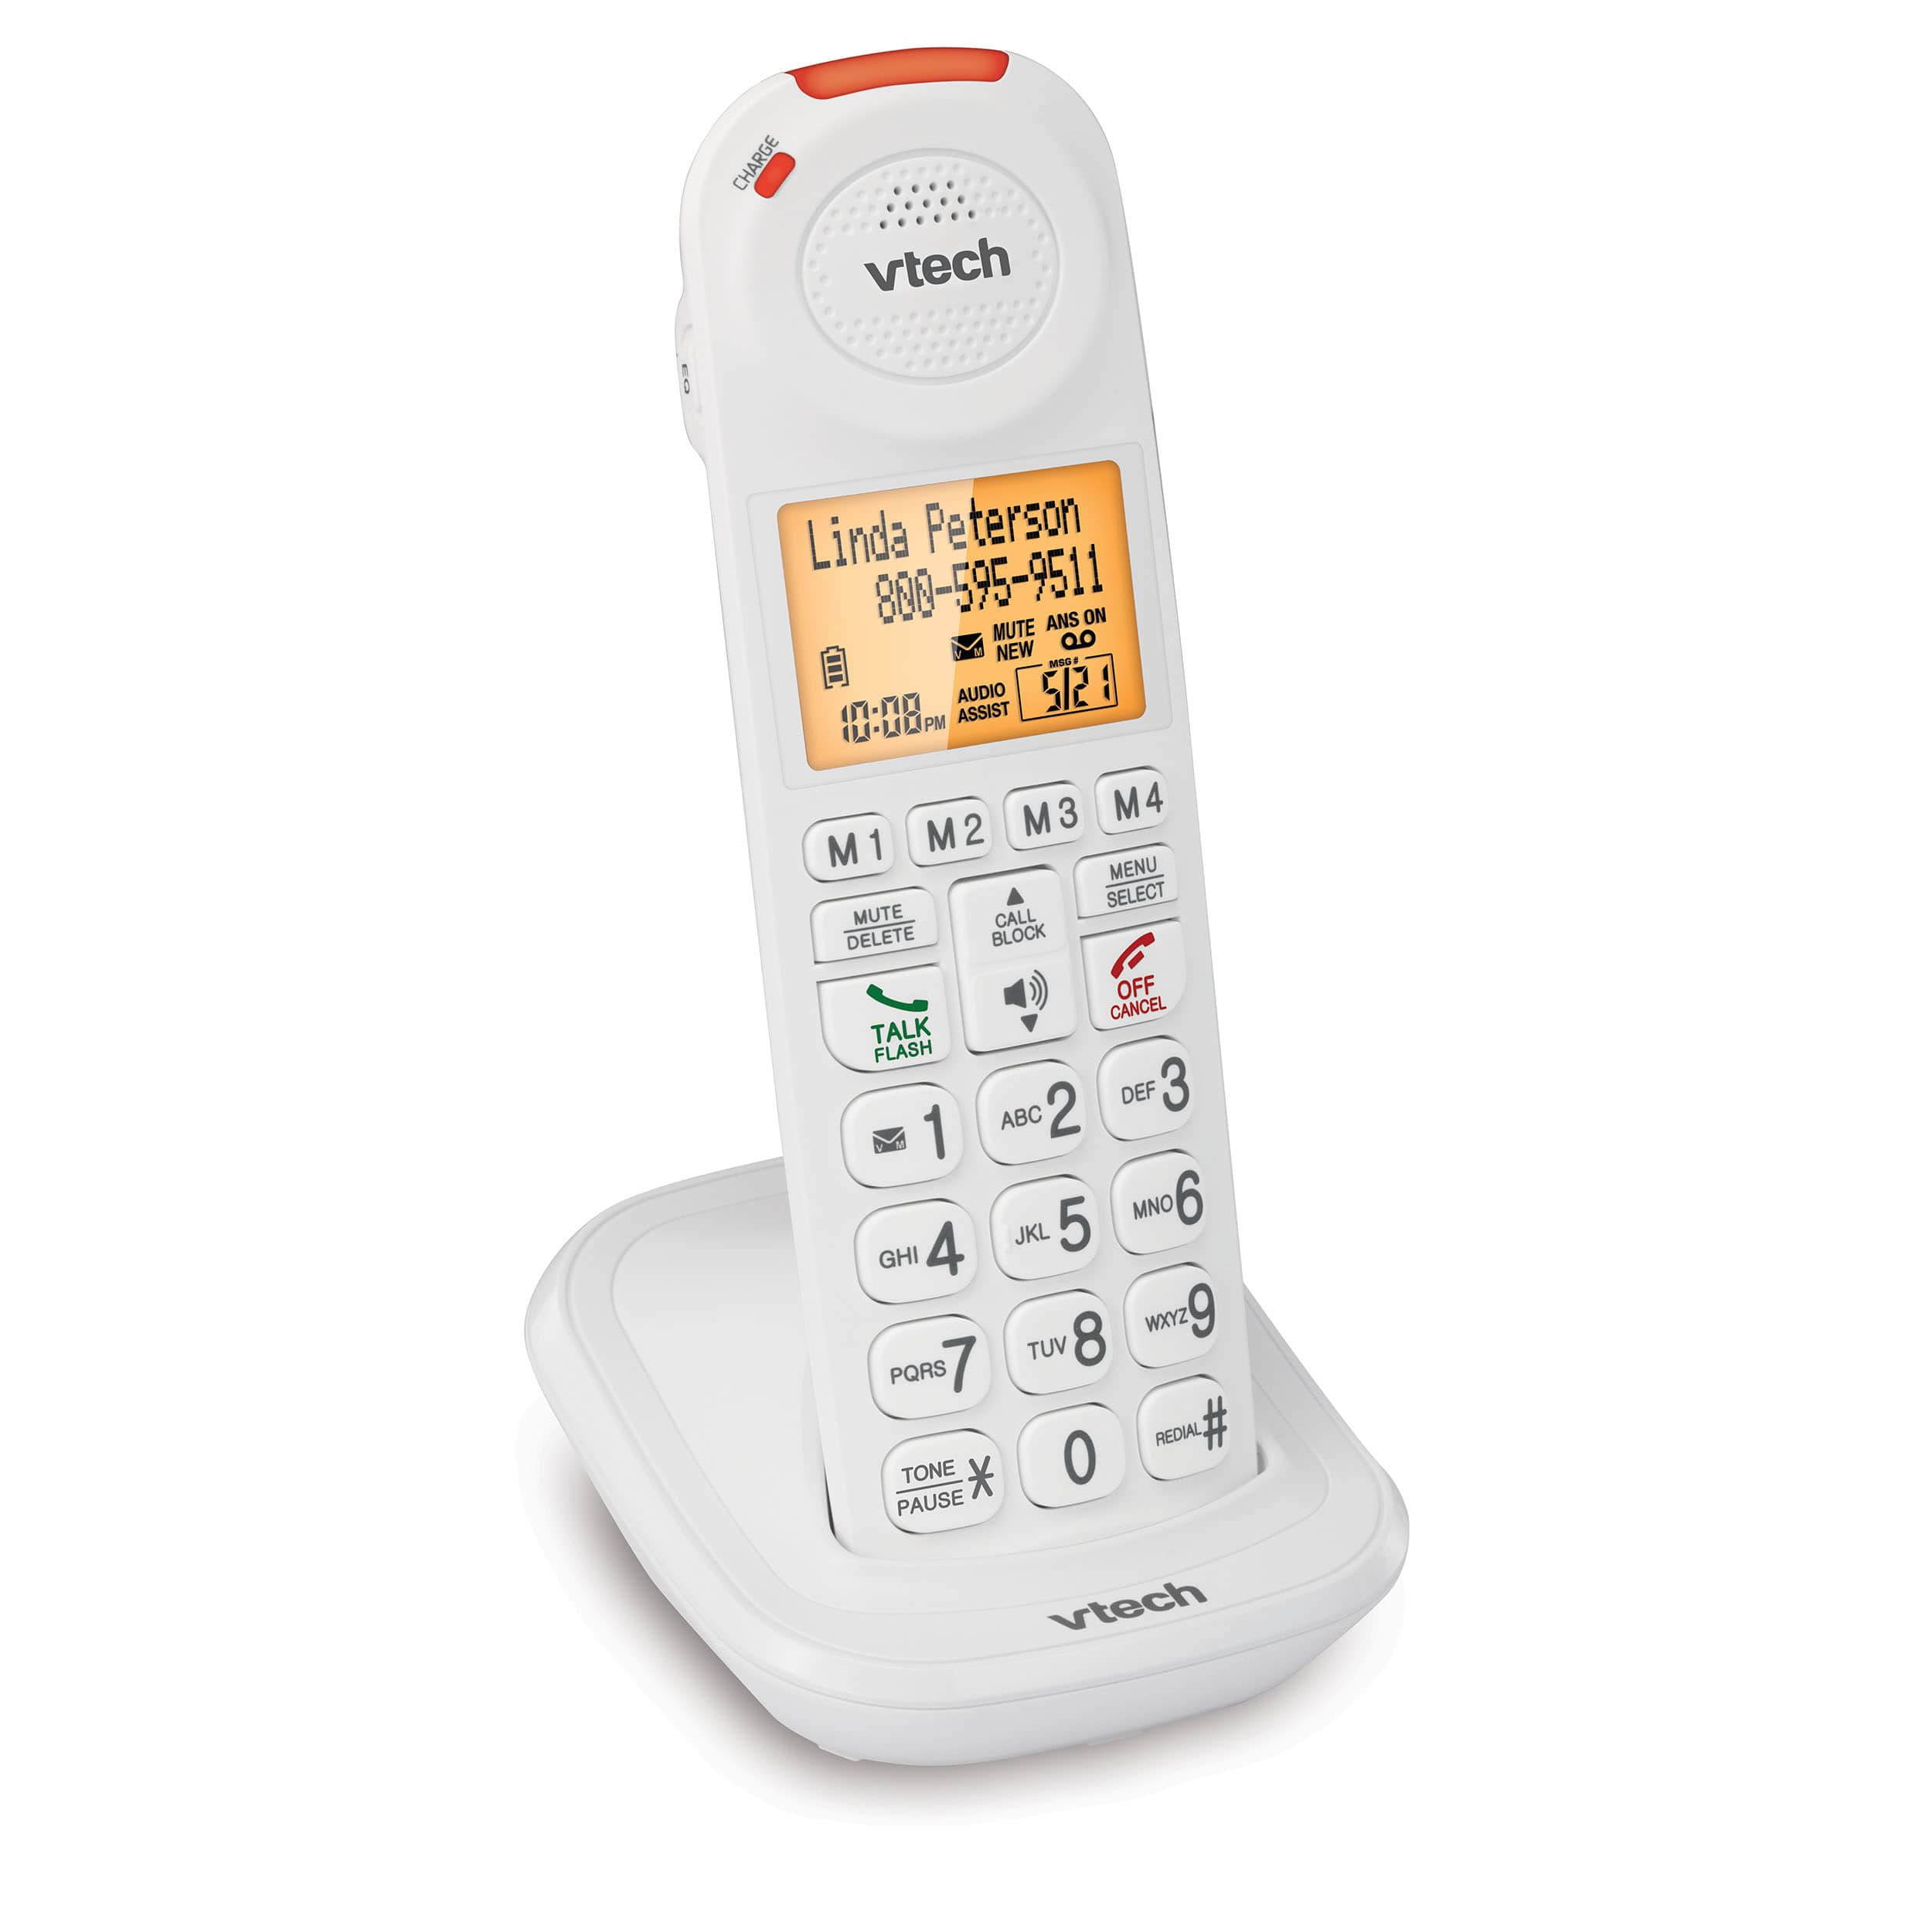 3 Handset Amplified Cordless Answering System with Big Buttons and Display